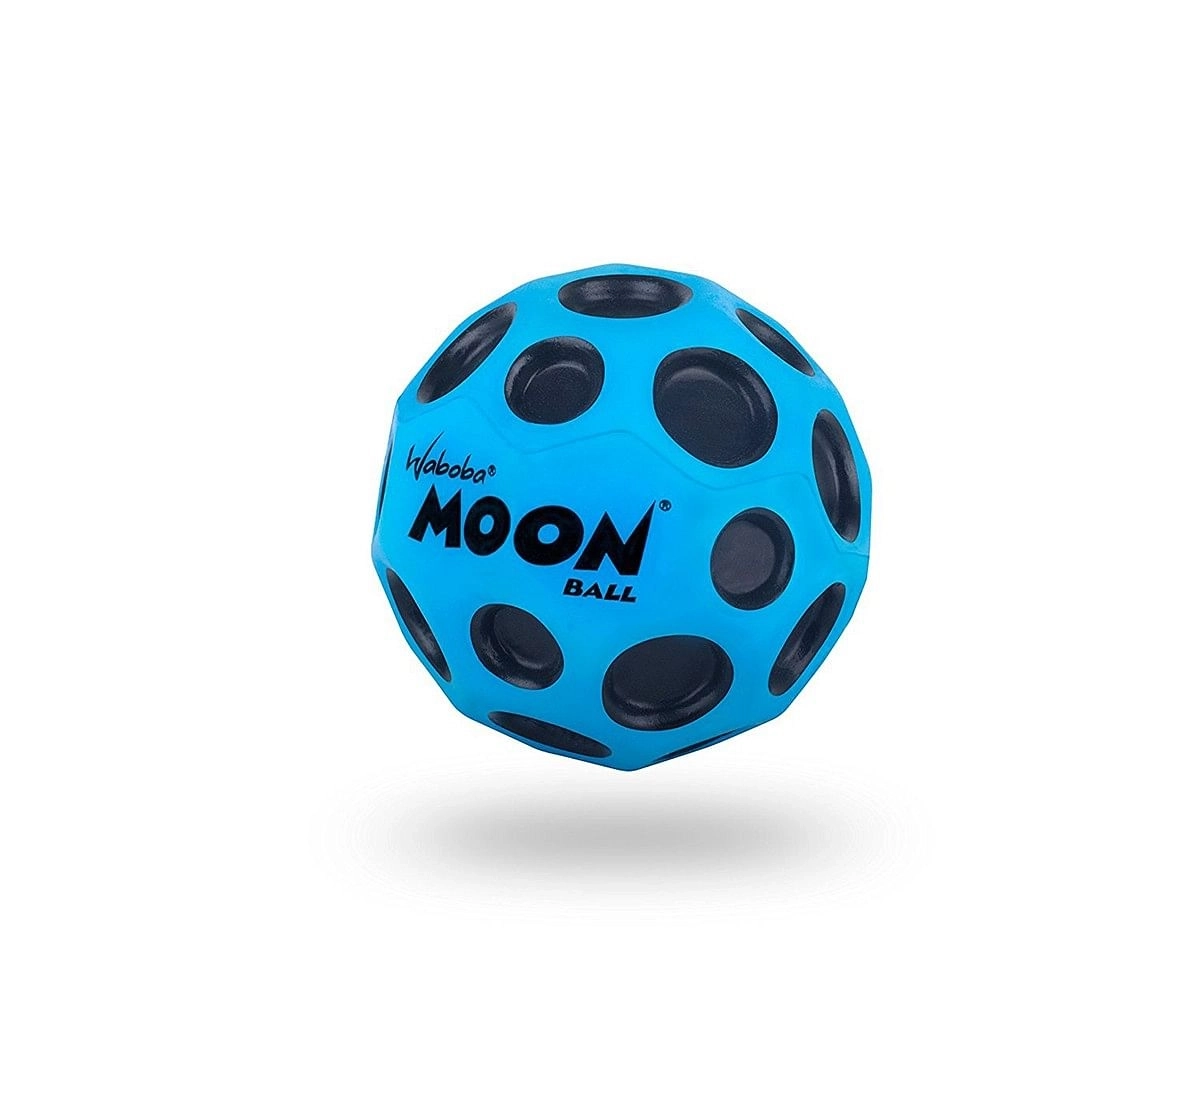 Waboba Moonball Ball Sports & Accessories for Kids age 5Y+ 